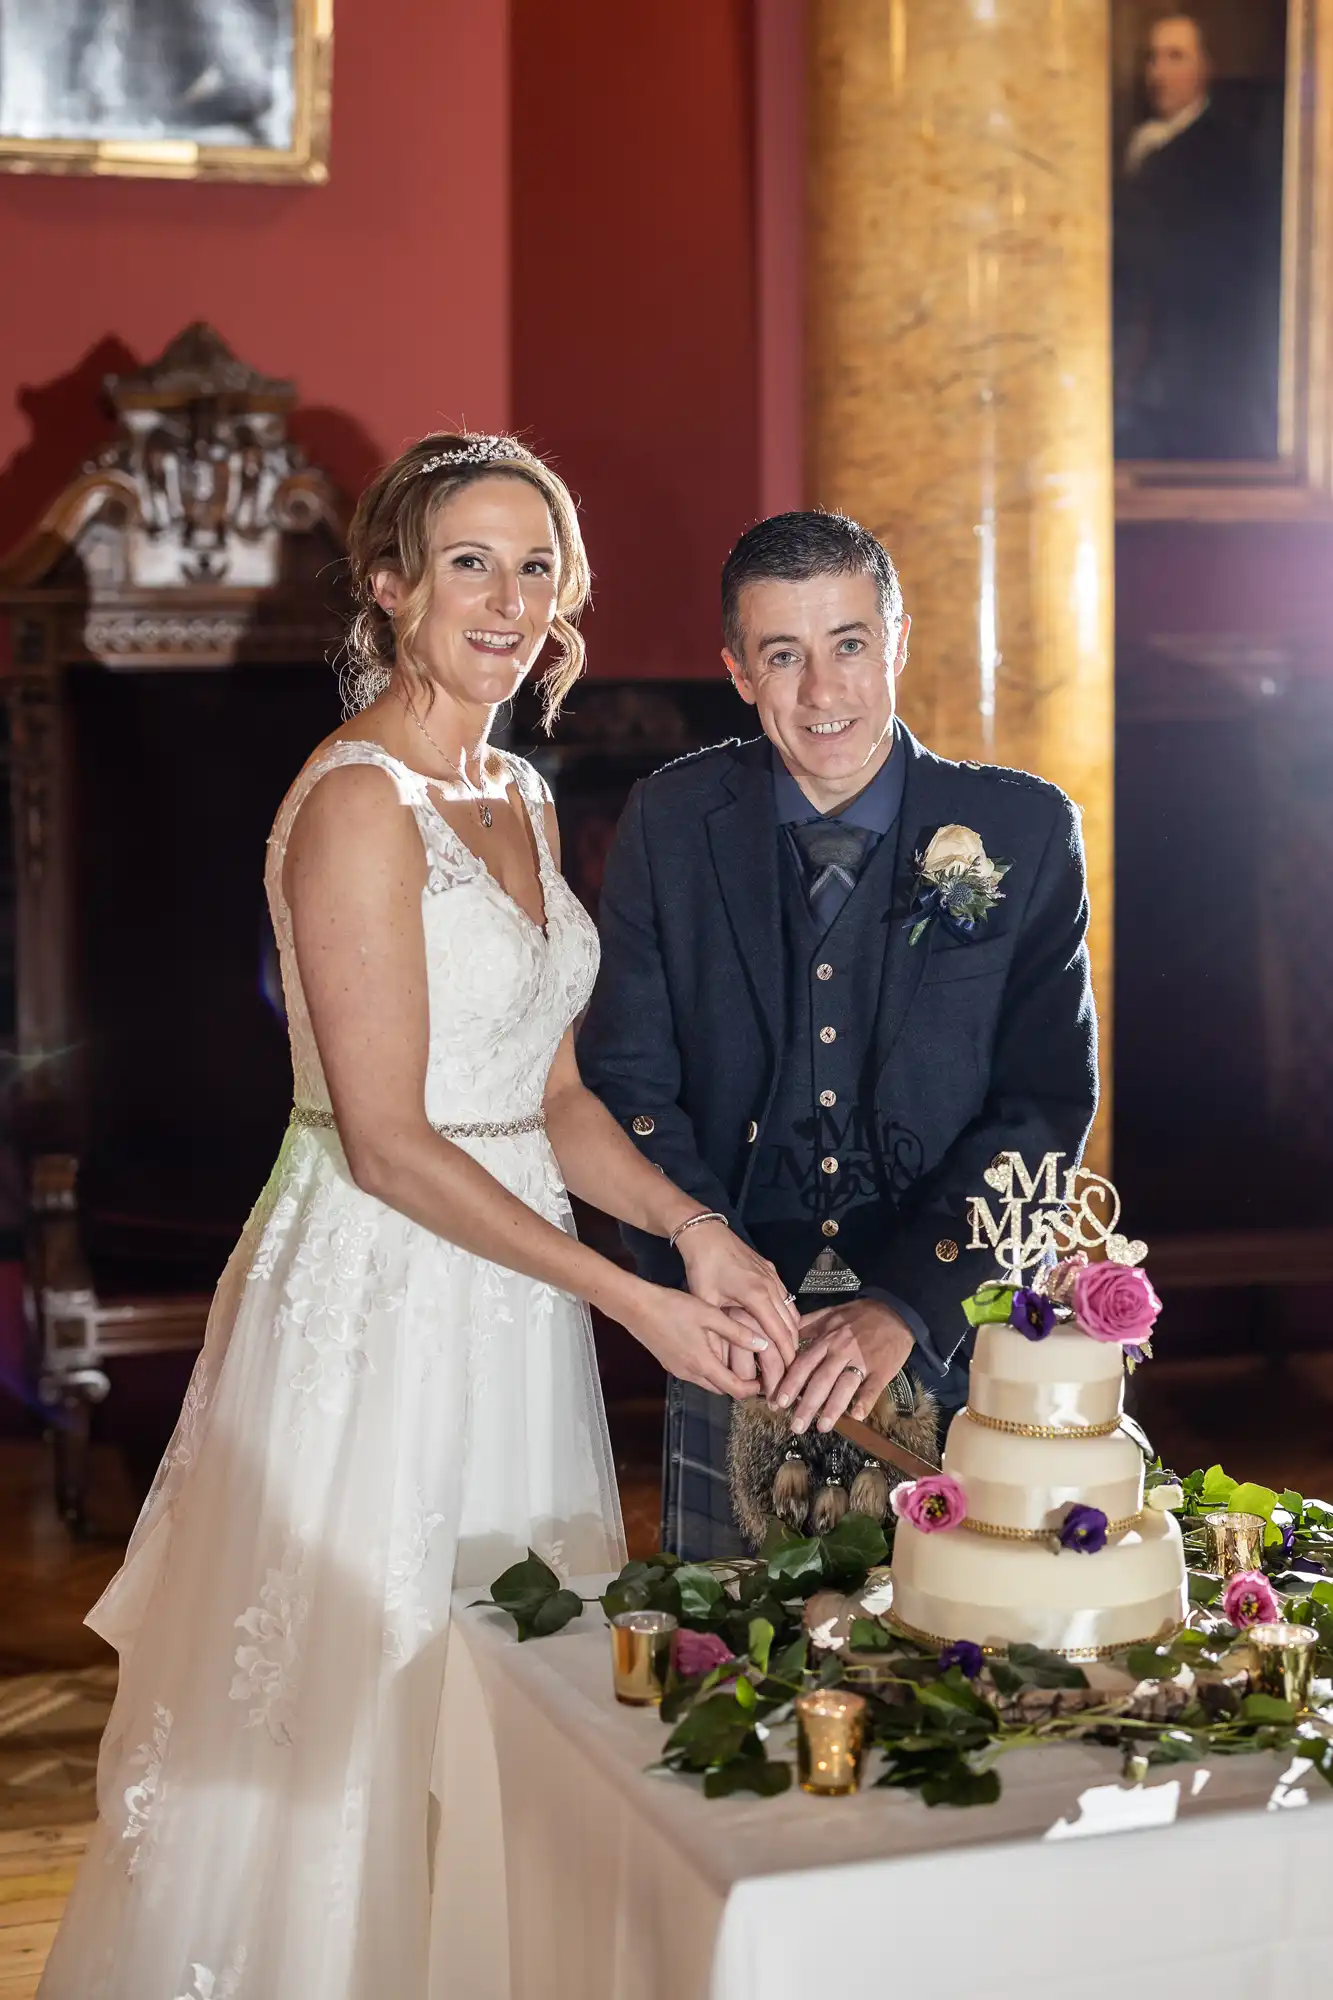 A bride and groom in wedding attire smile as they cut a tiered wedding cake decorated with flowers and a "Mr & Mrs" topper. They stand in an ornate room with a column and framed painting in the background.